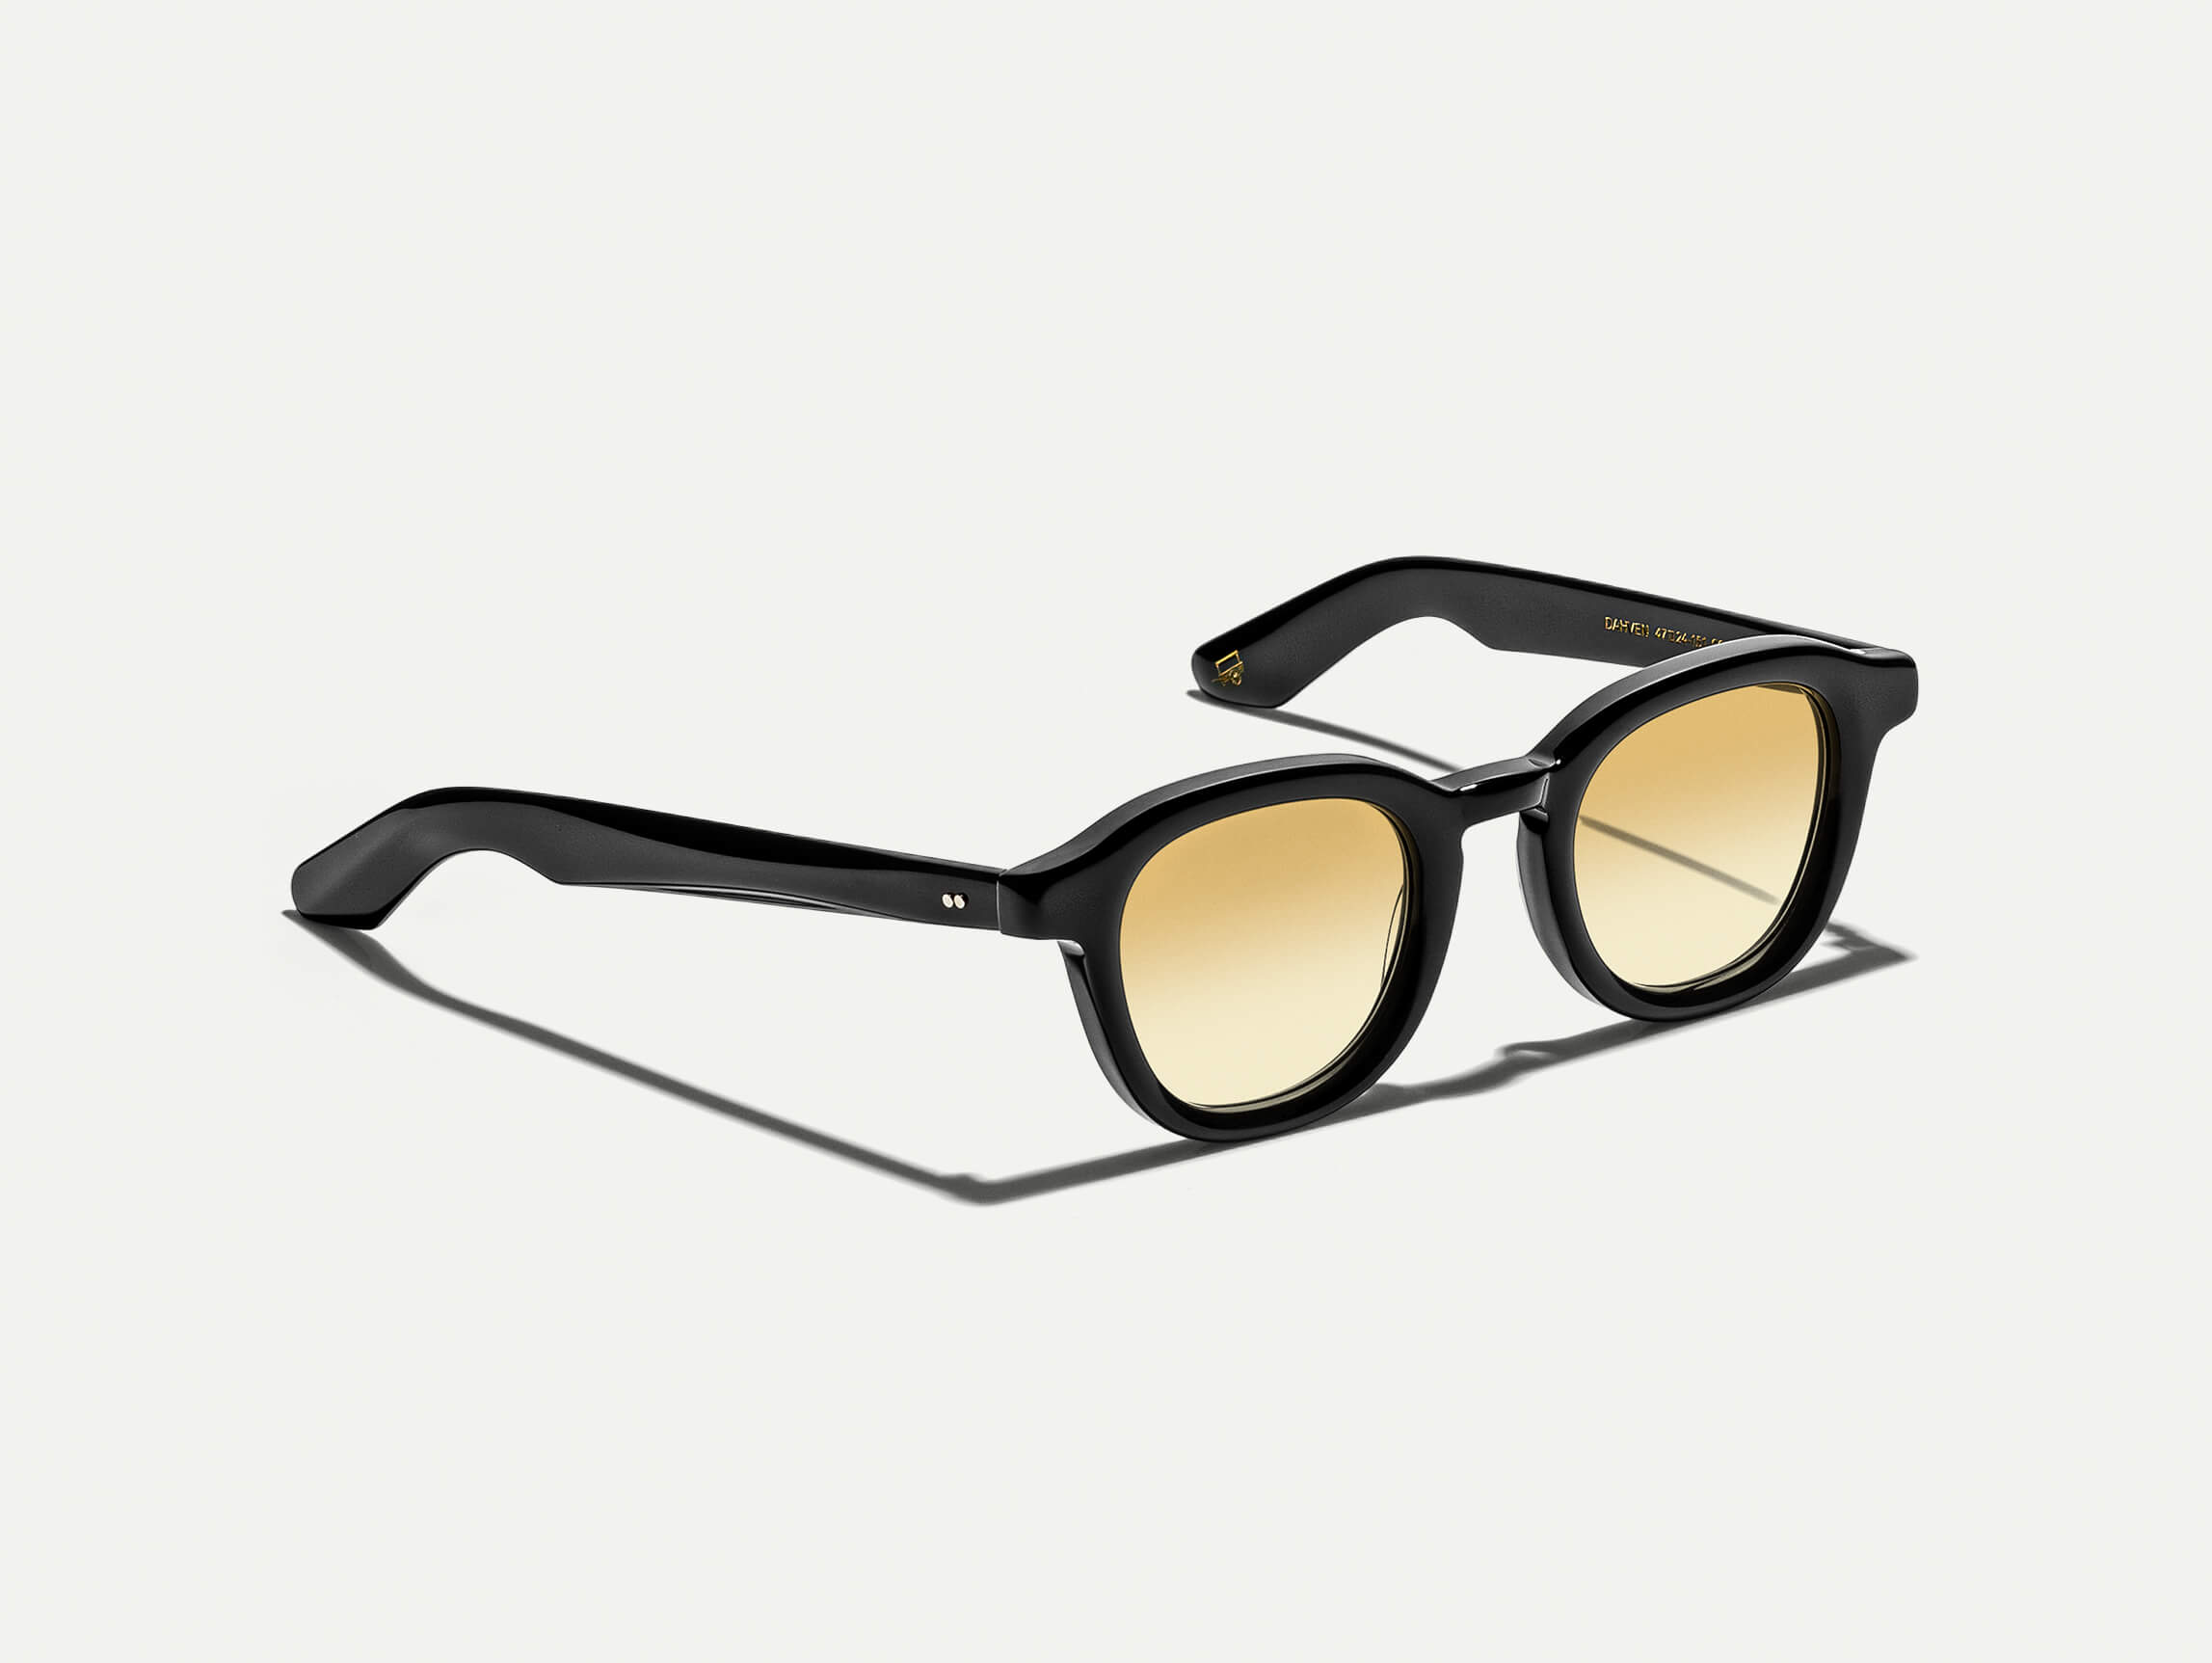 The DAHVEN Black with Chestnut Fade Tinted Lenses